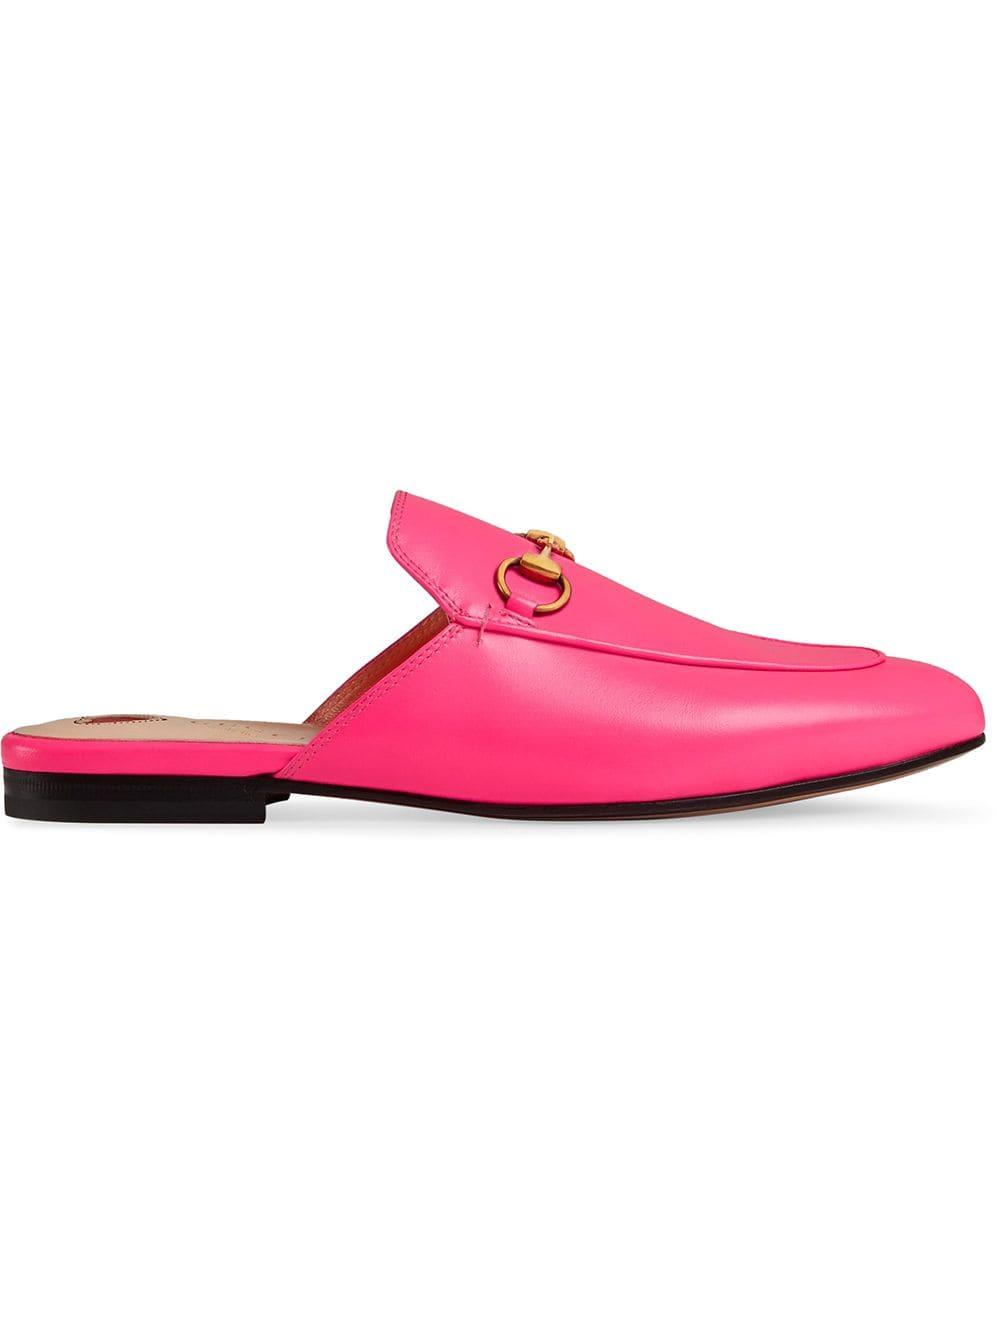 Gucci Princetown Mules in Pink | Lyst